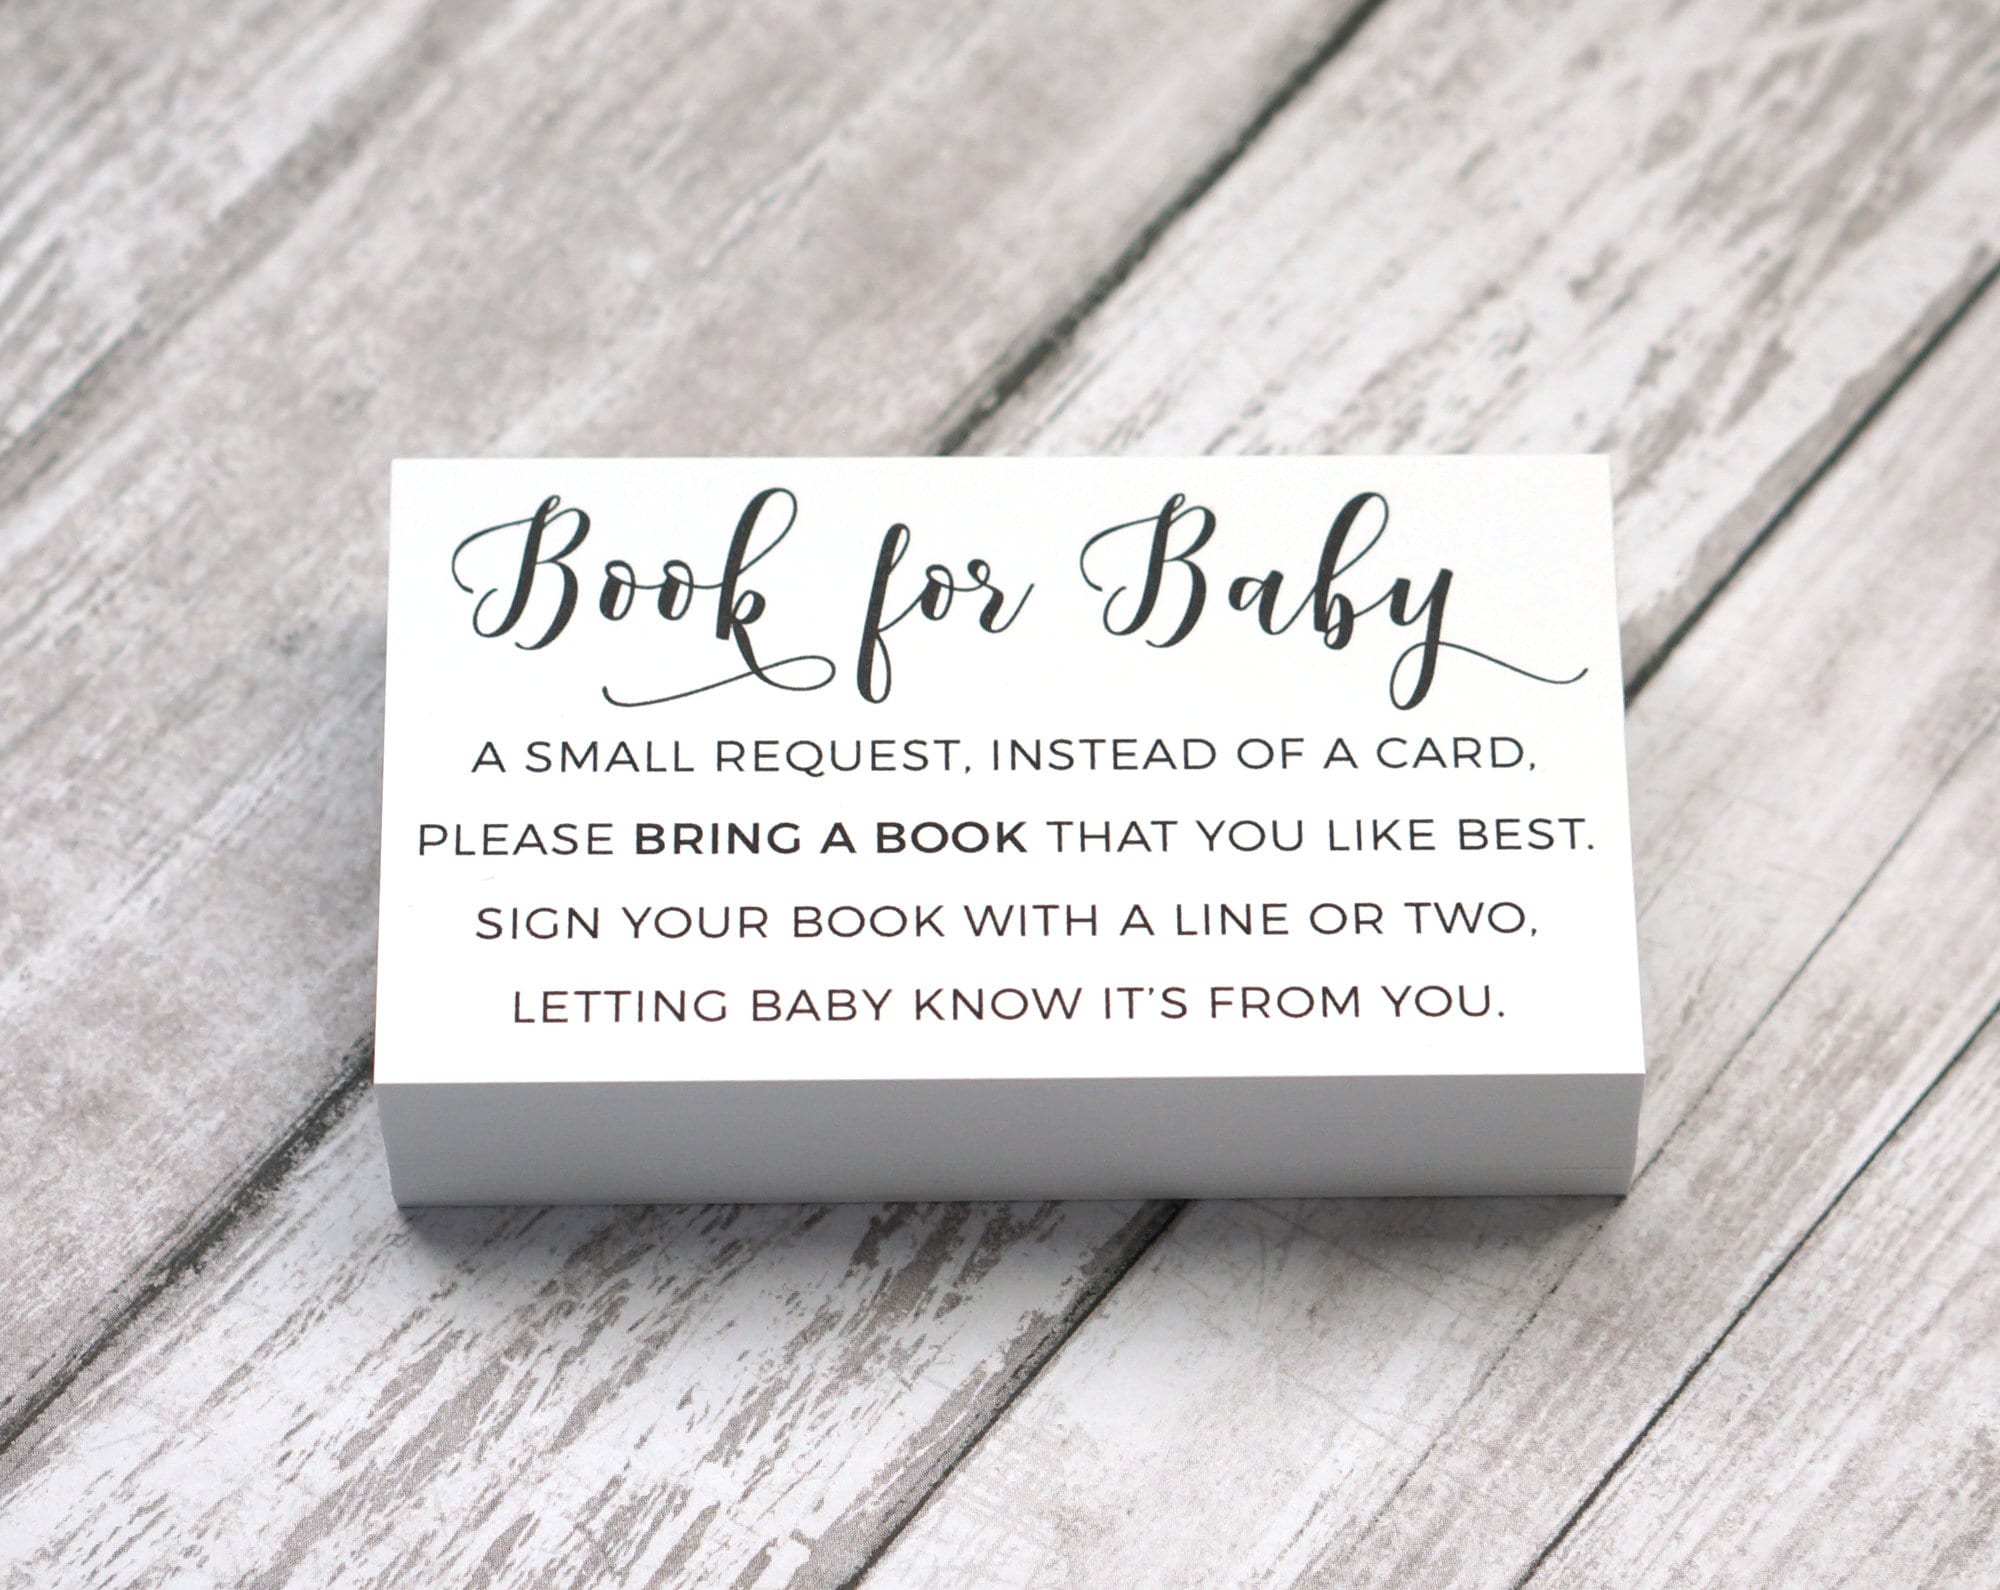 printable-baby-book-request-card-bring-a-book-instead-of-a-card-baby-s